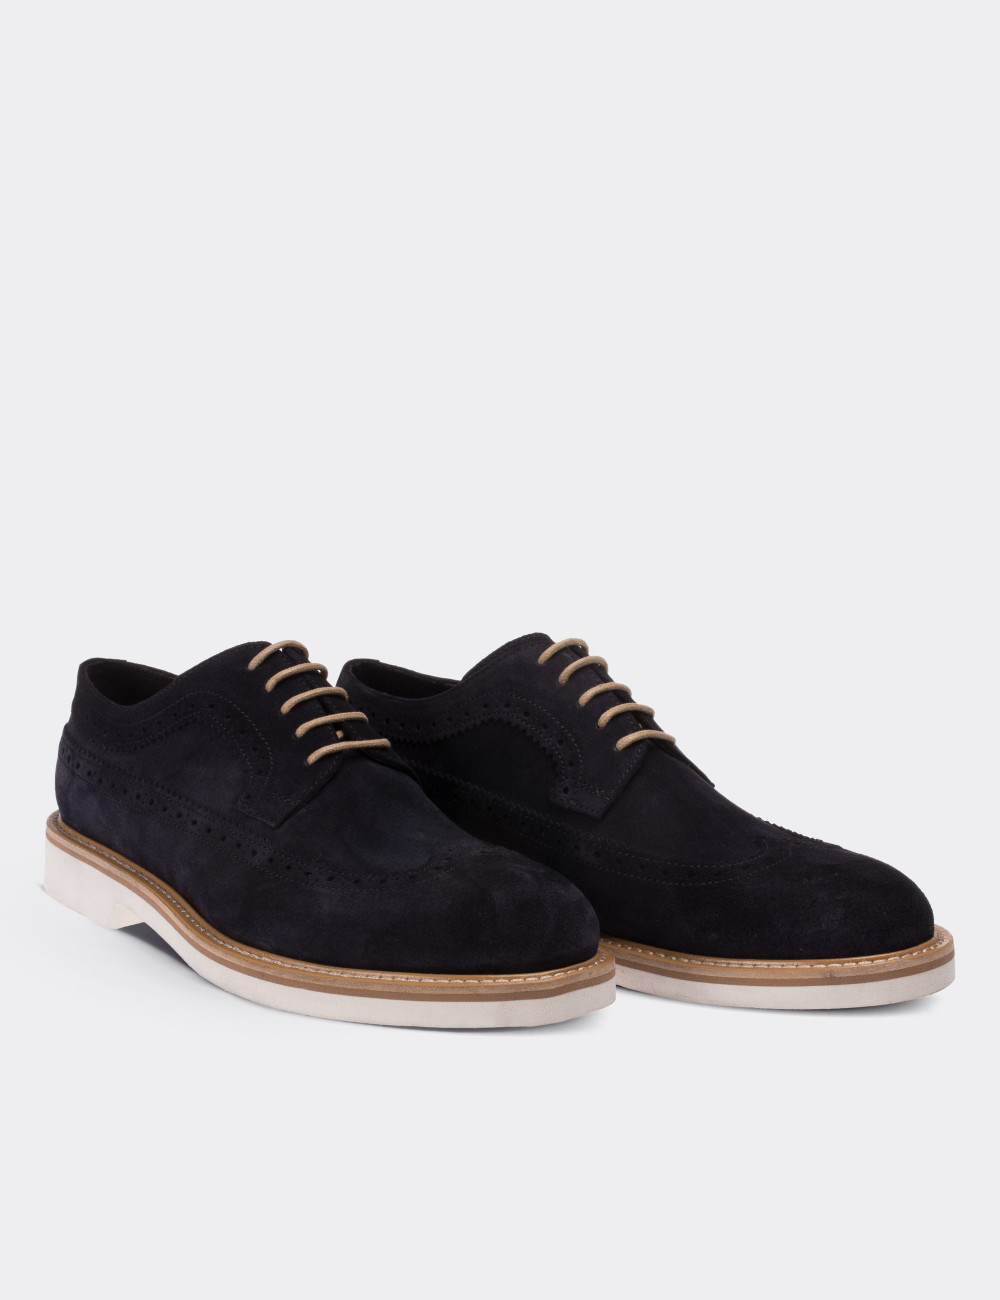 Navy Suede Leather Lace-up Shoes - 01293MLCVE25